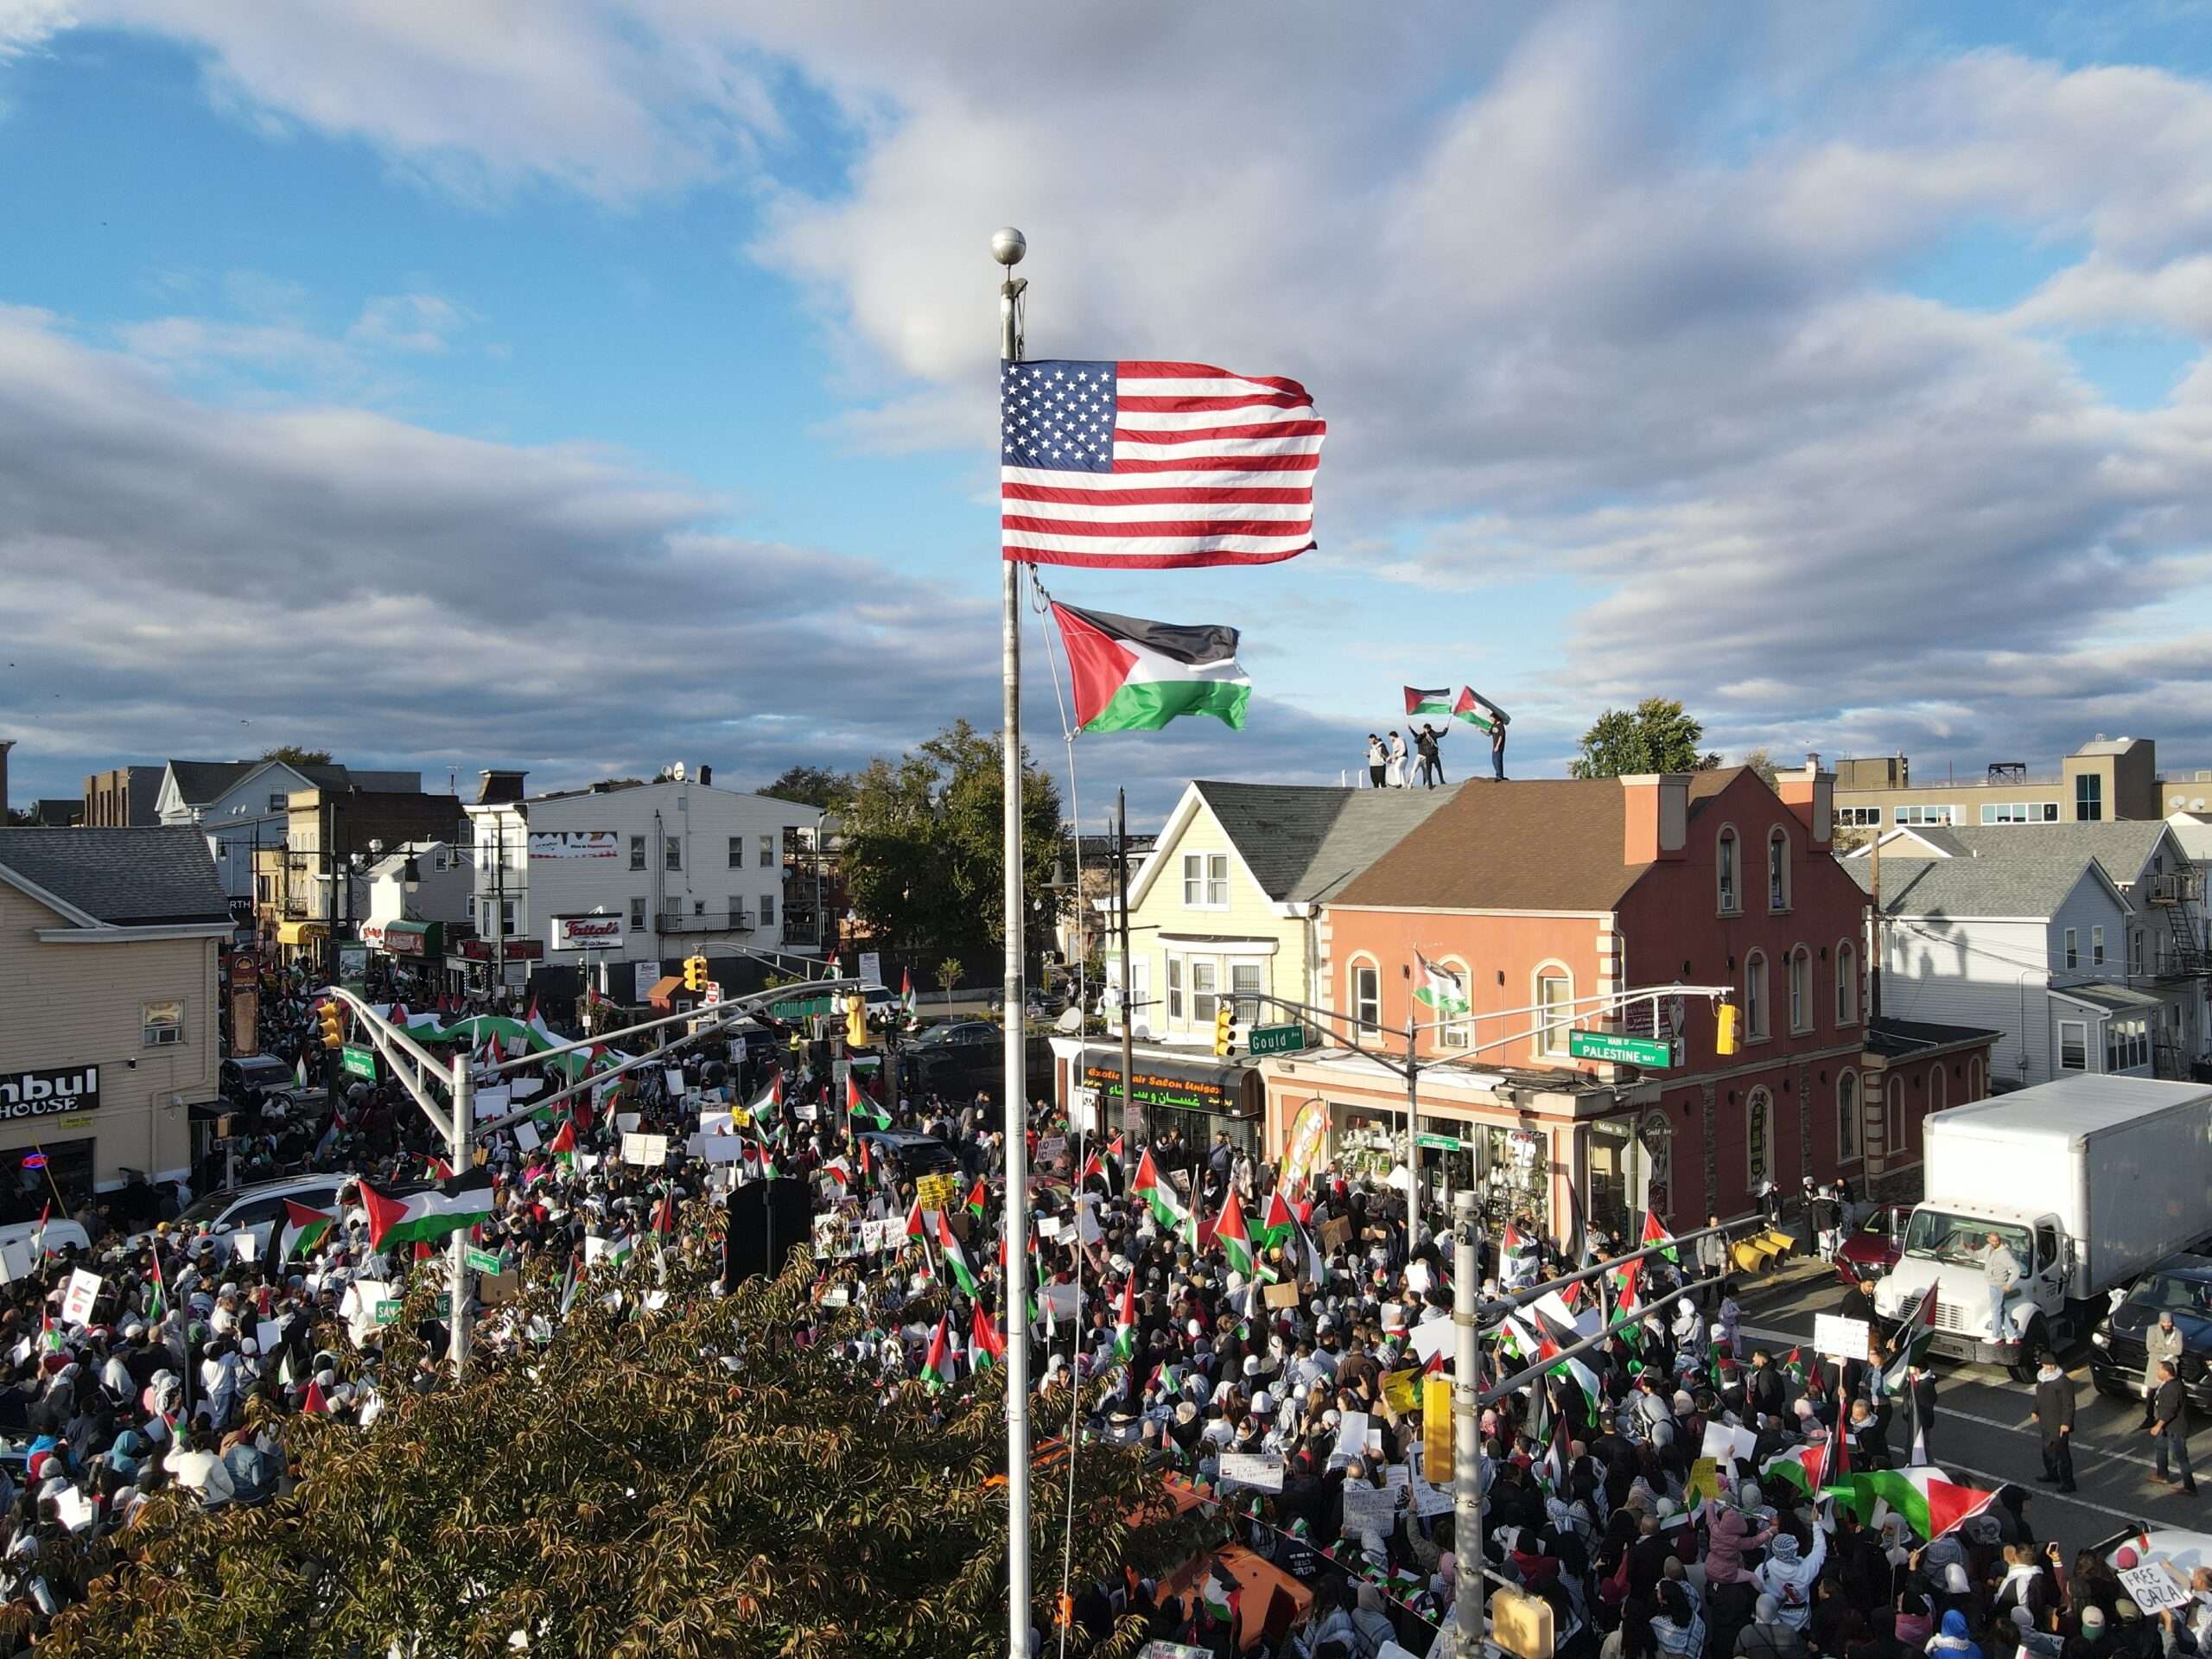 Palestinian Americans Are Americans, Too